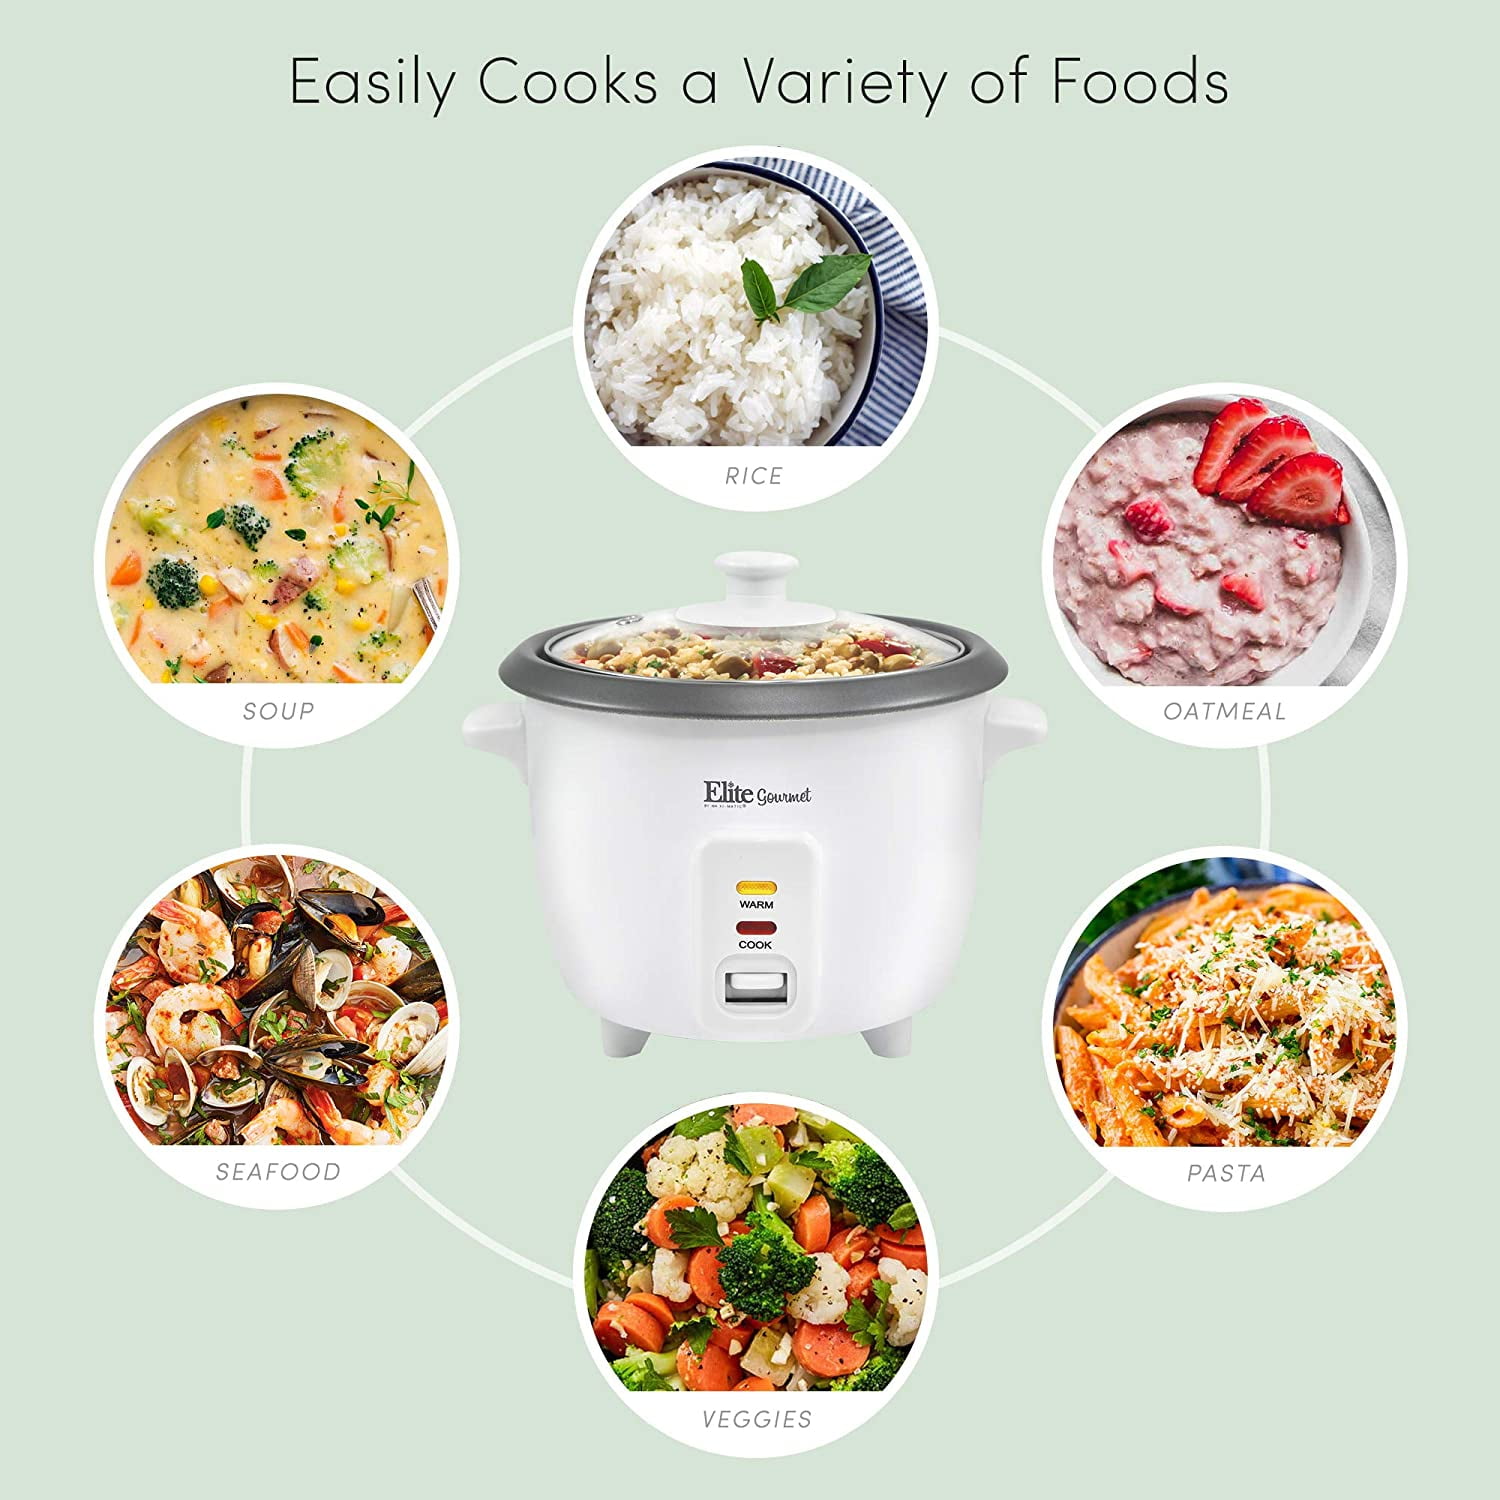 Elite Gourmet ERC006SS 6-Cup Electric Rice Cooker with 304 Surgical Grade  Stainless Steel Inner Pot, Makes Soups, Stews, Porridges, Grains and